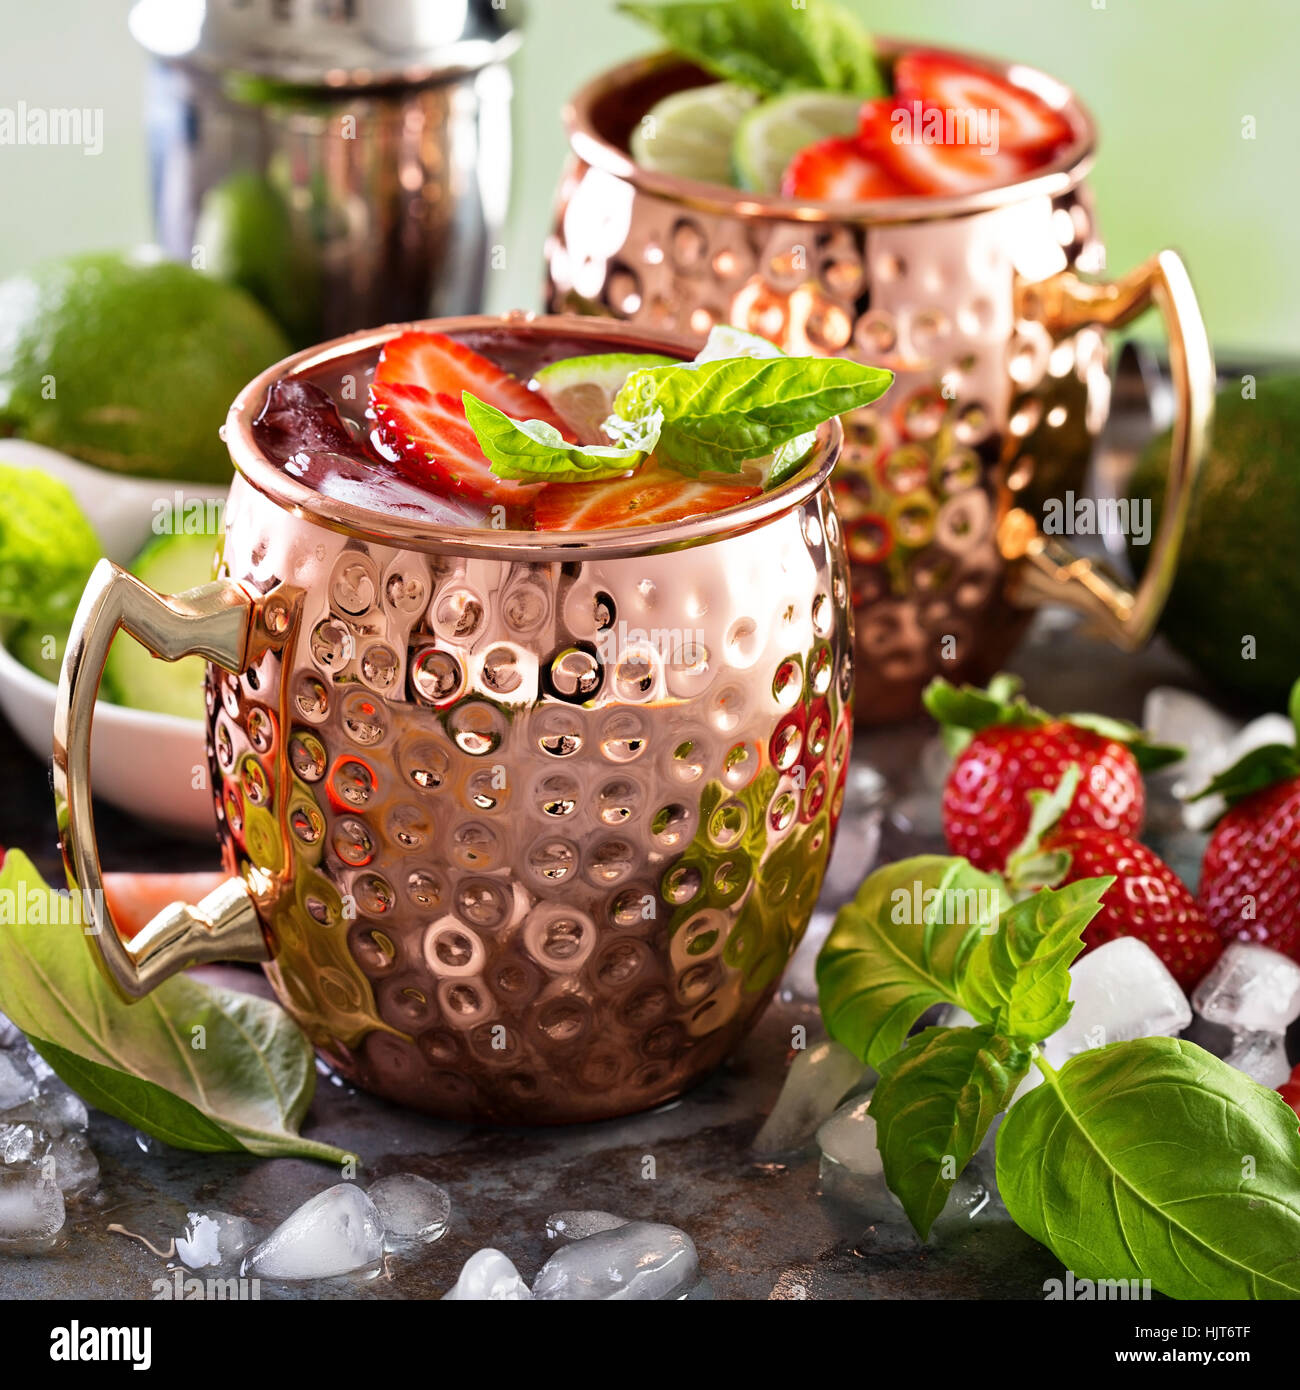 Moscow mule cocktail con lime e fragola Foto Stock